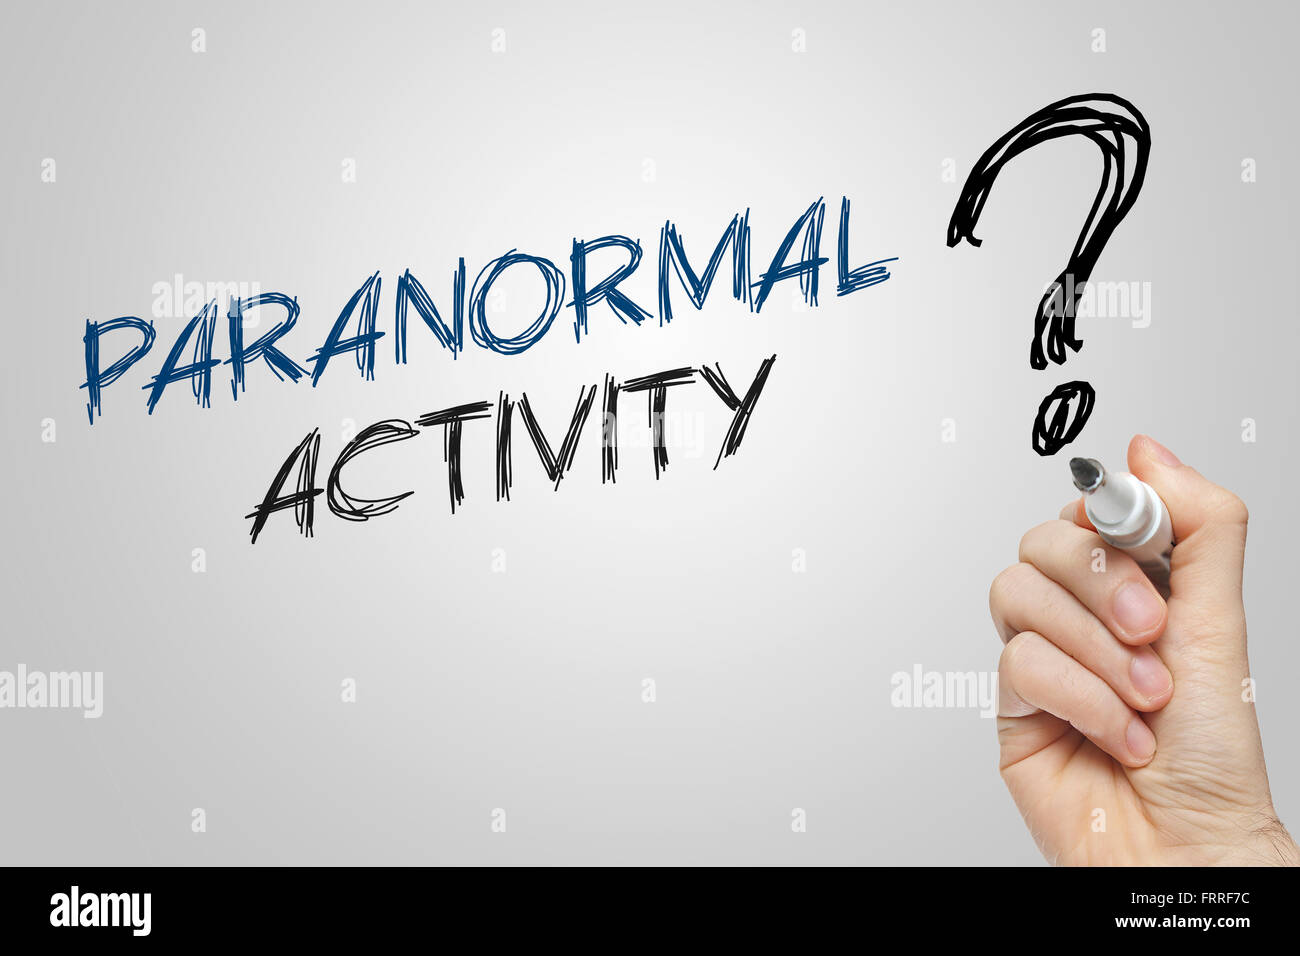 Hand writing paranormal activity on grey background Stock Photo